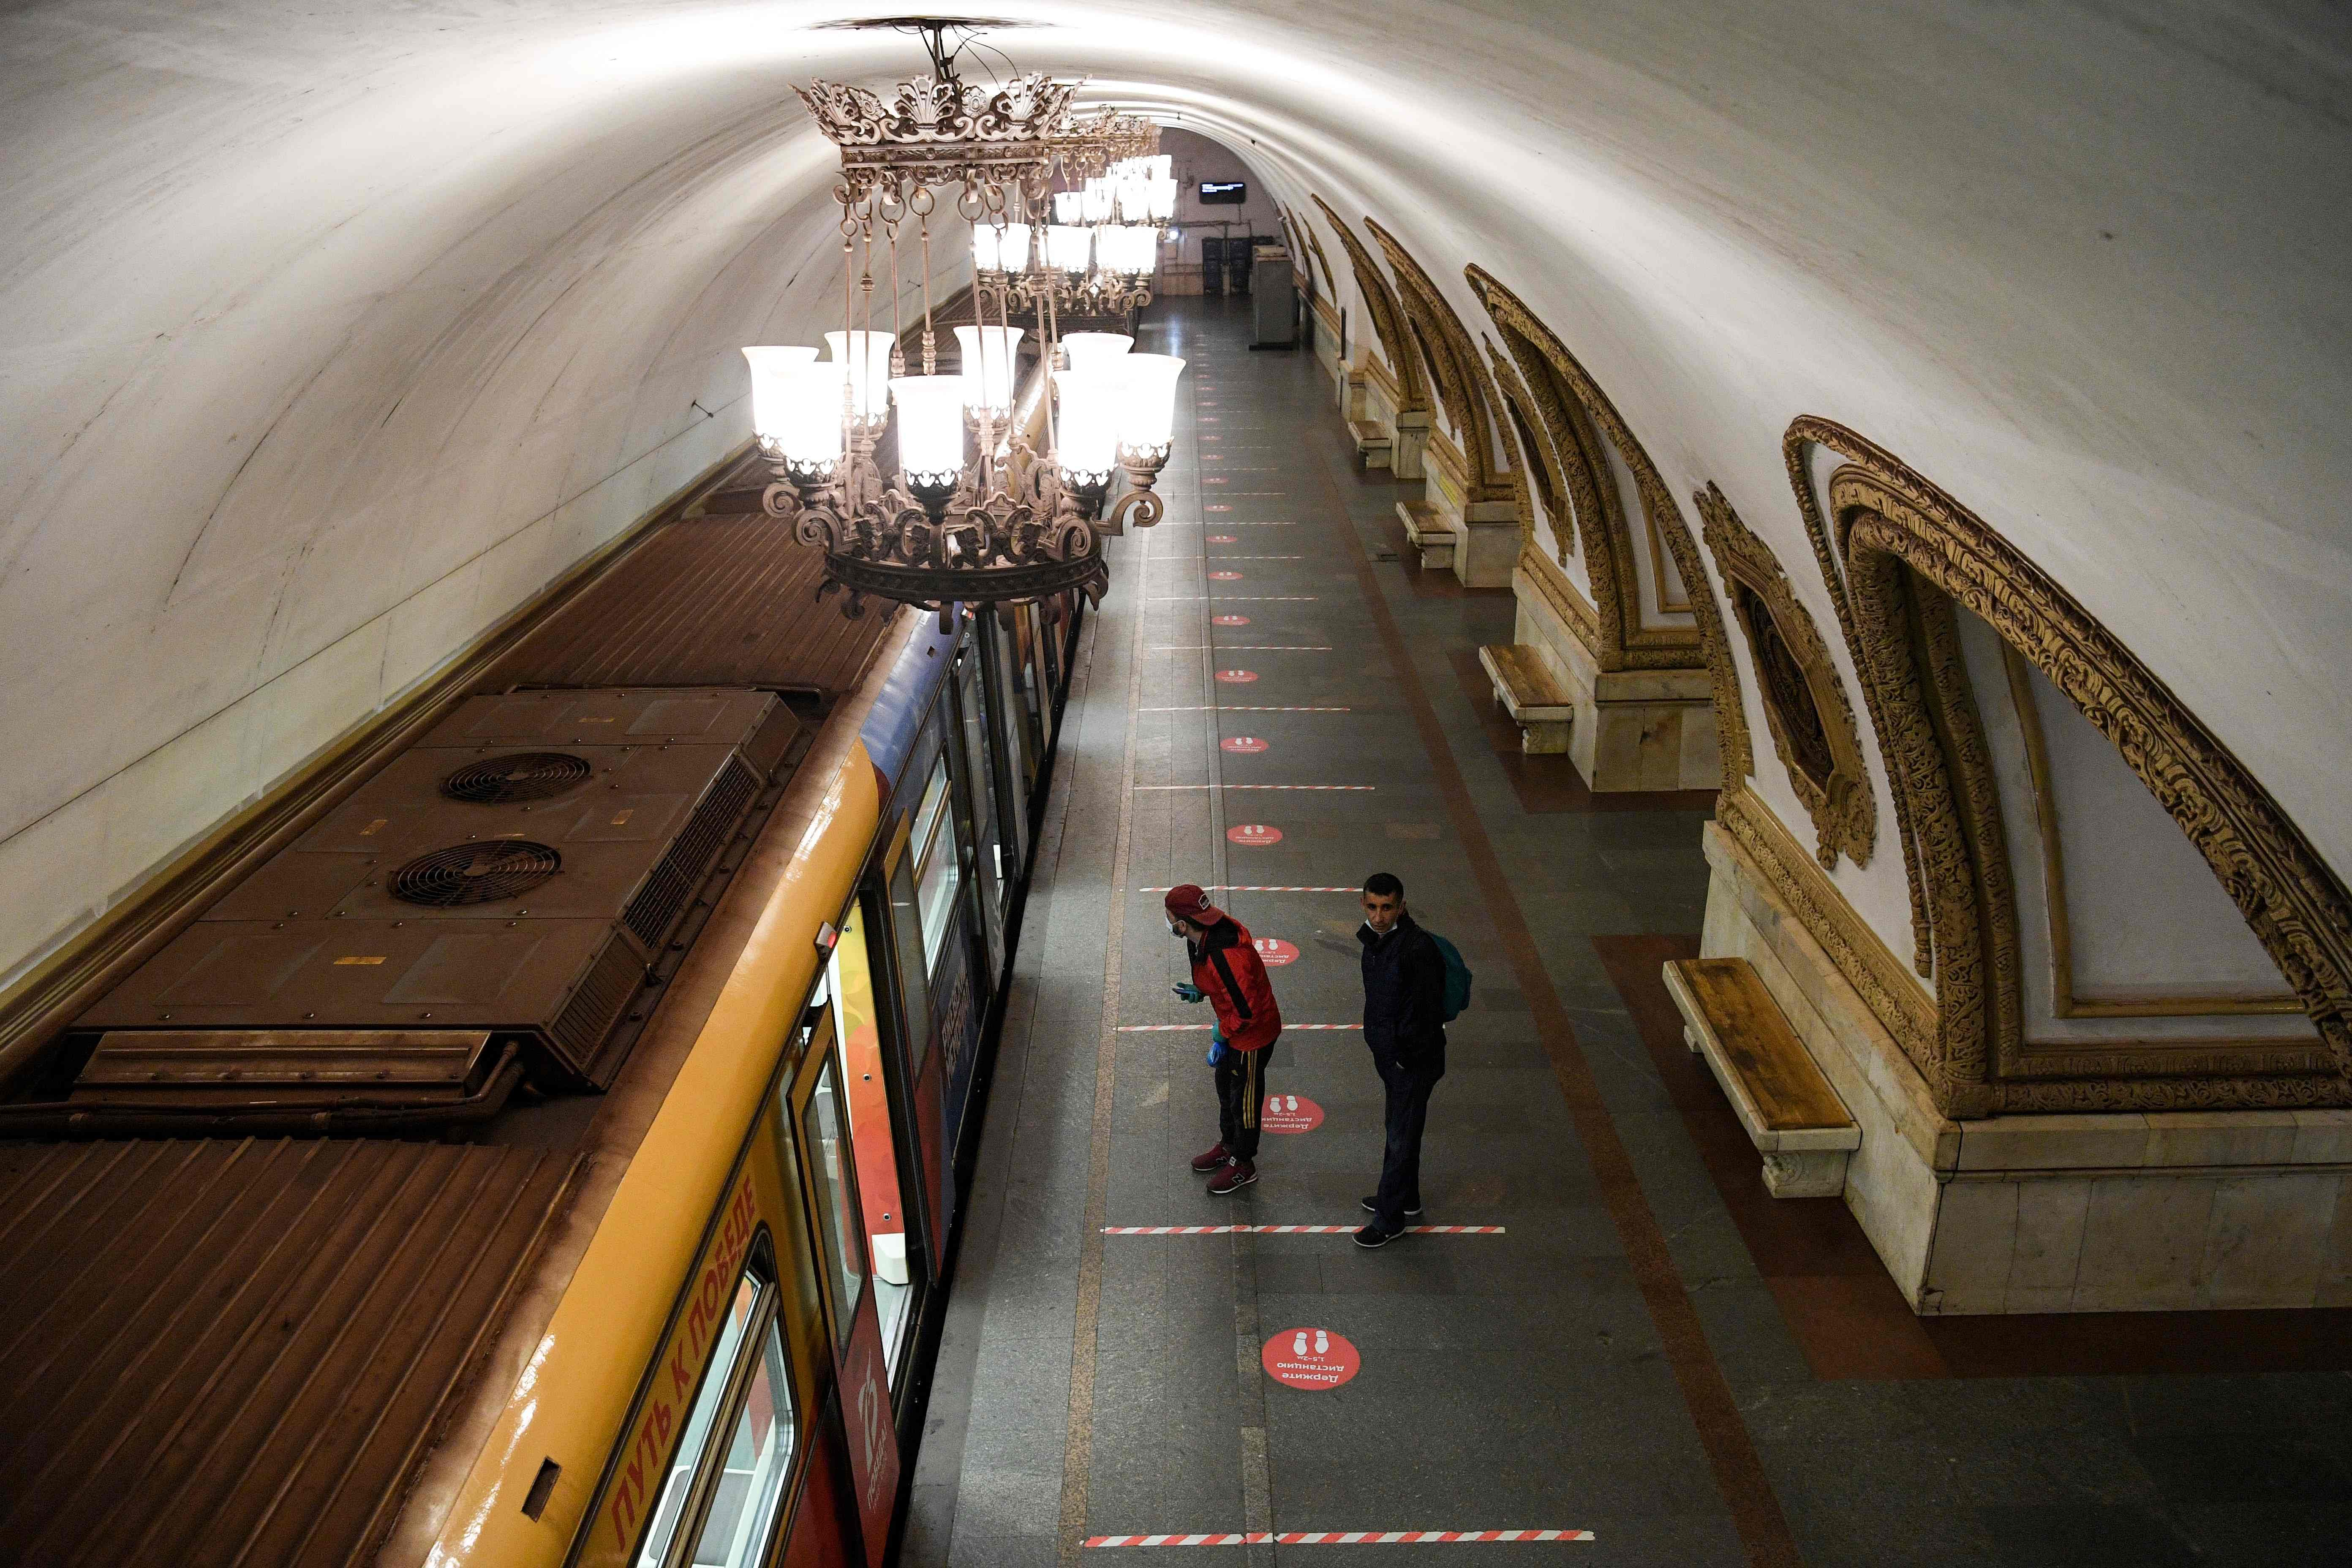 Men wearing a protective masks walk on a platform at the Kievskaya metro station in Moscow. (AFP photo)